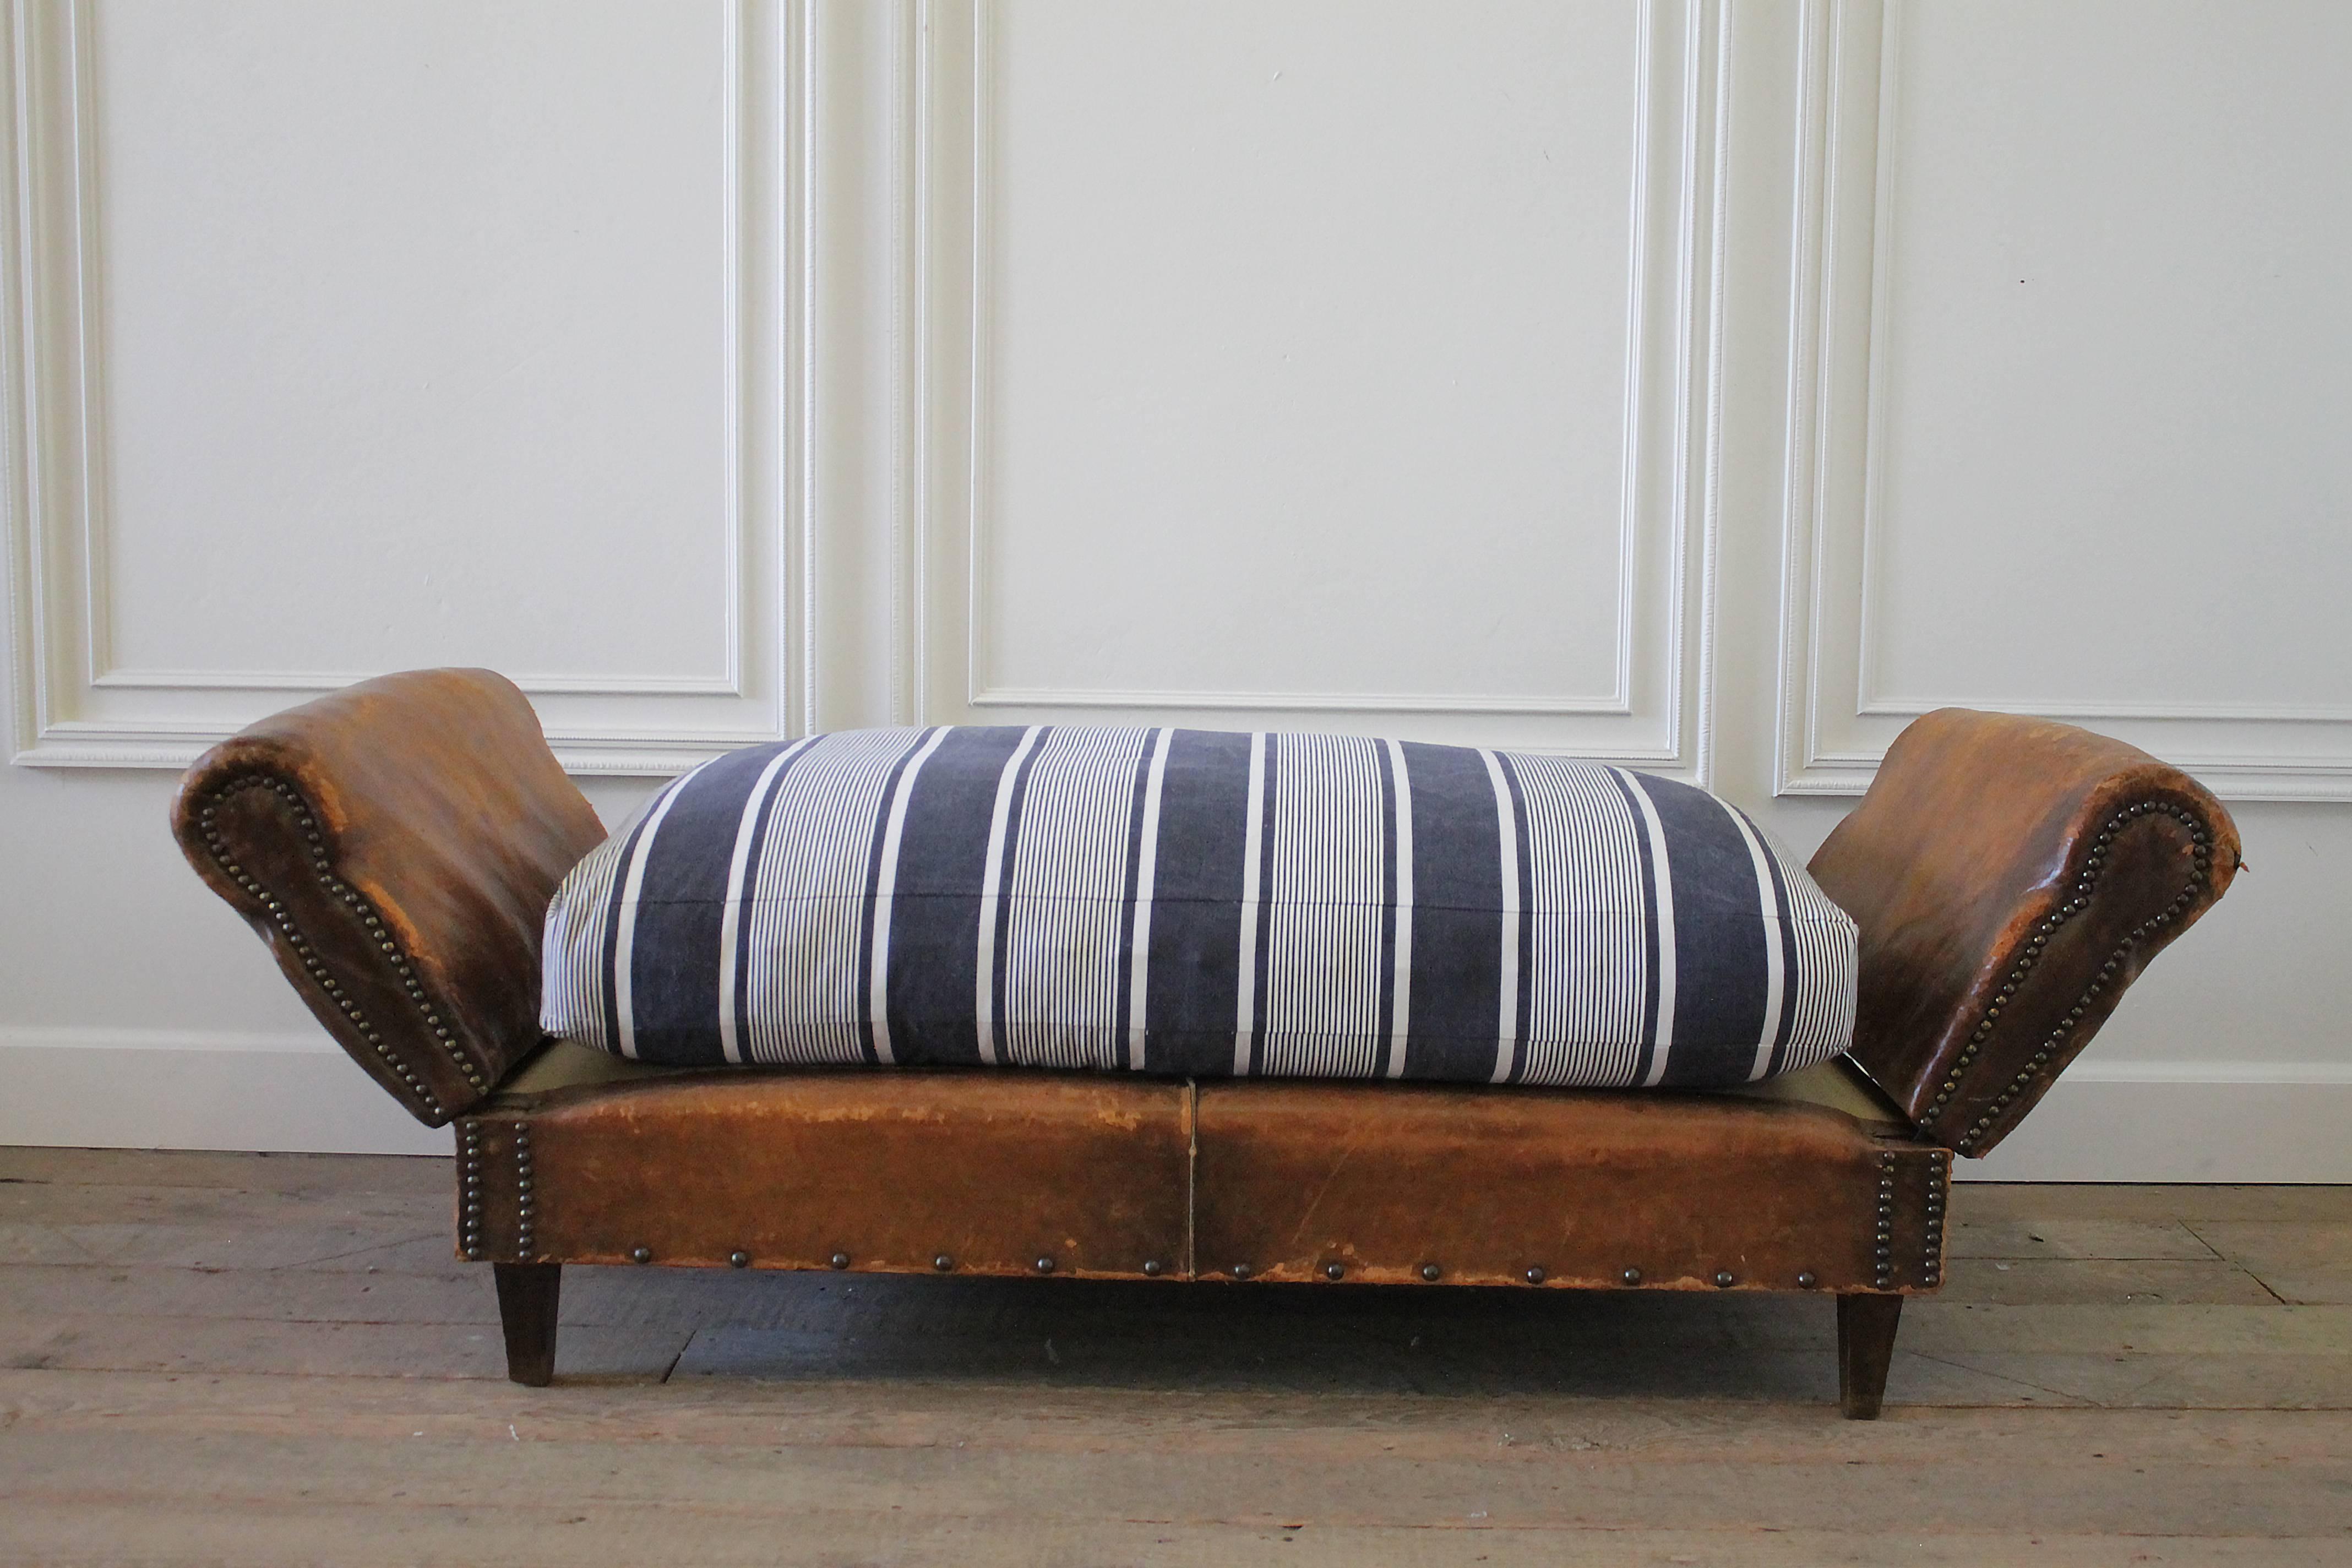 Art Deco Antique French Leather Drop Arm Daybed Sofa with French Mattress Ticking